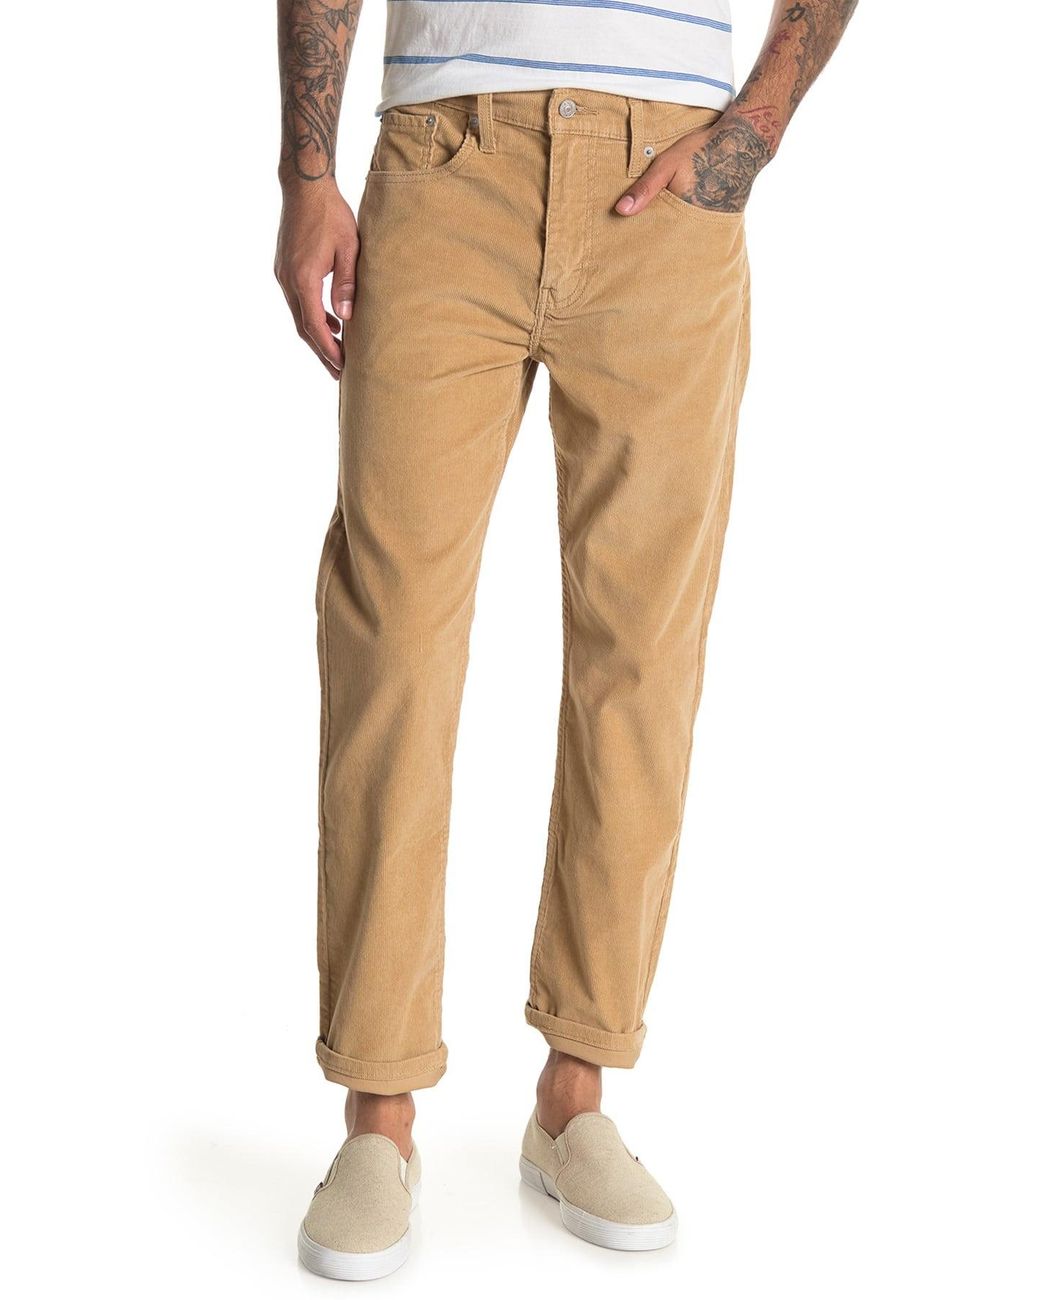 Levi's 502 Tapered Leg Corduroy Jeans in Natural for Men - Lyst